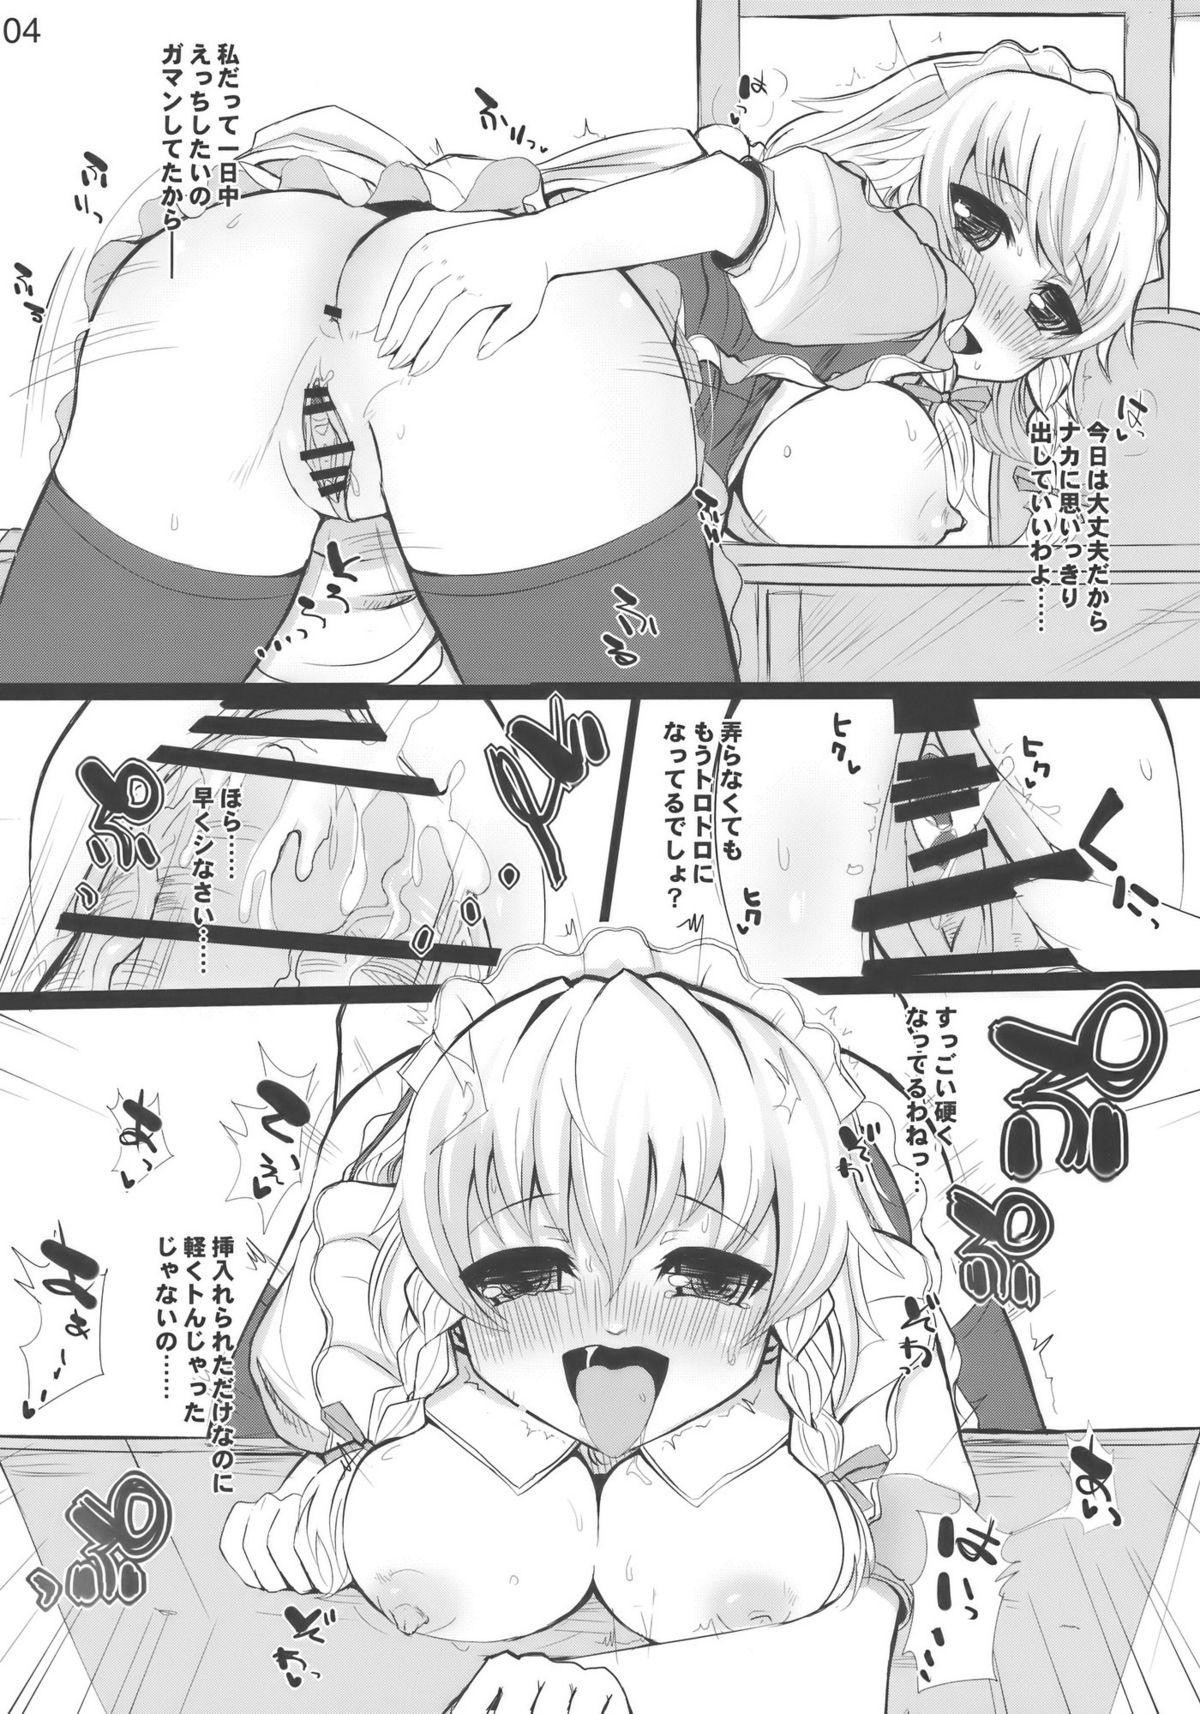  Feed me with your Kiss - Touhou project Bigboobs - Page 4